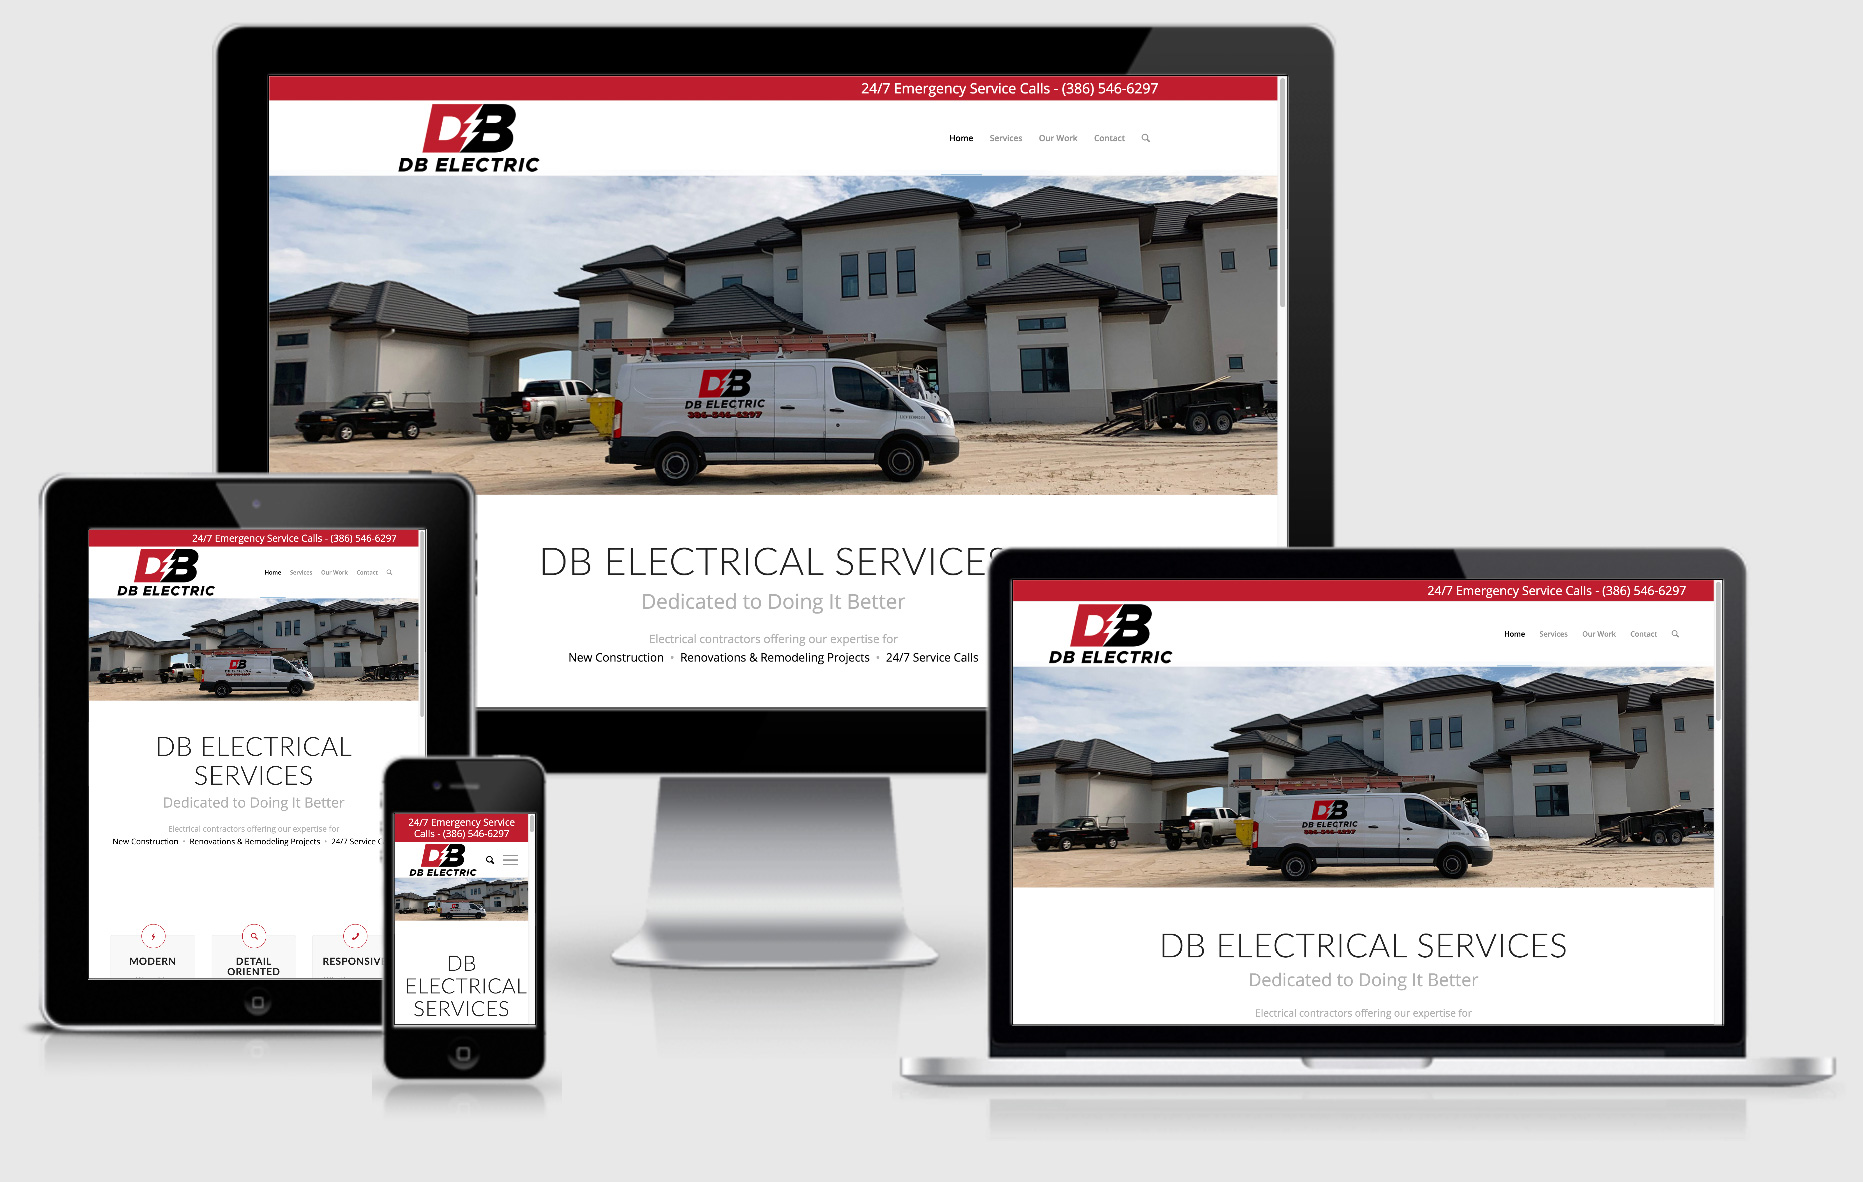 Palm Coast Electricians - DB Electrical Services